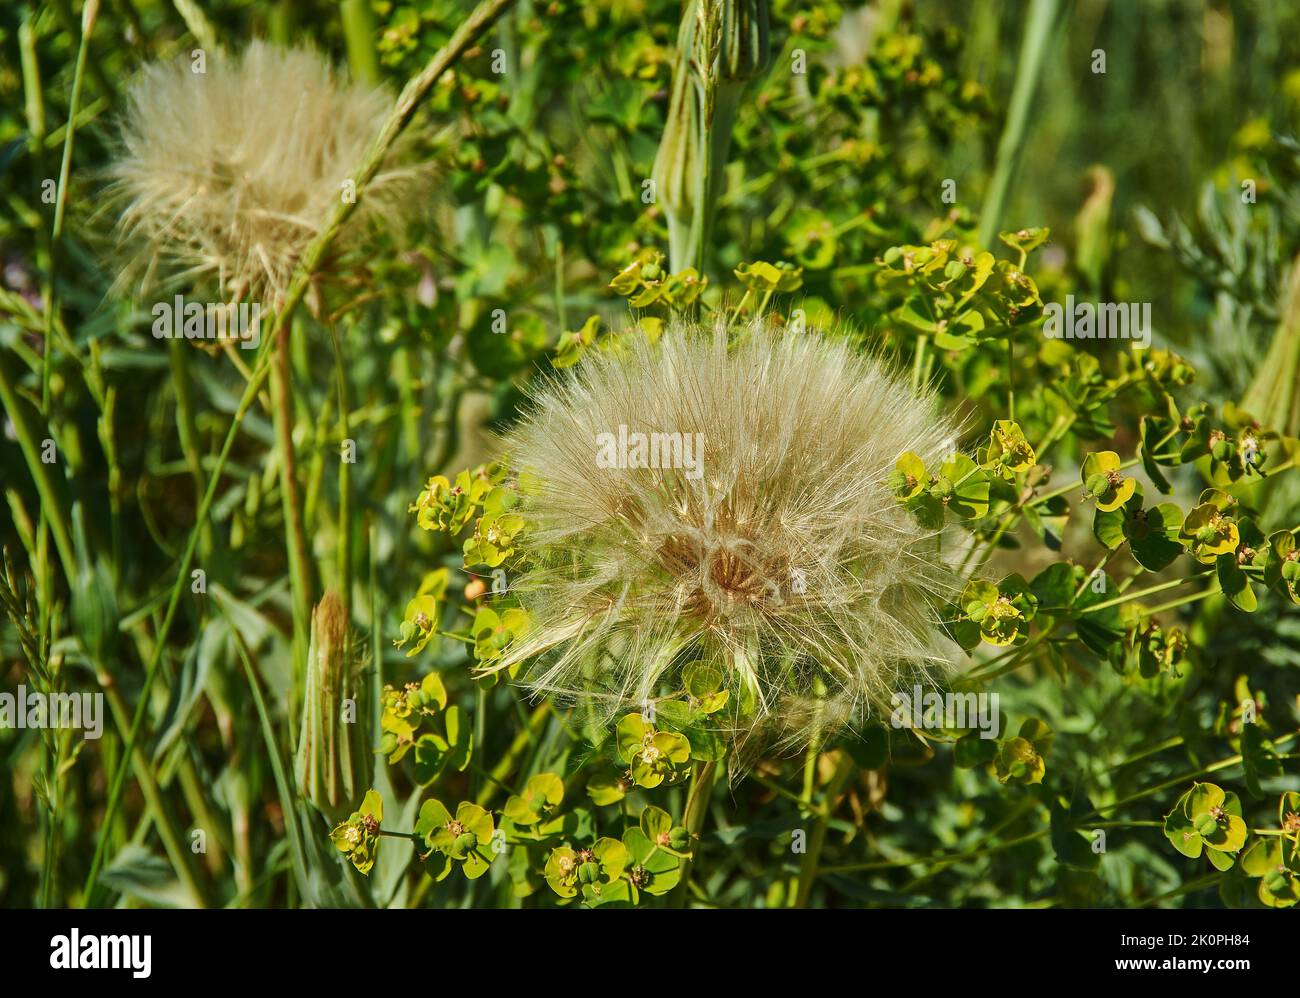 Tragopogon -  genus of flowering plants in the family Asteraceae. Stock Photo